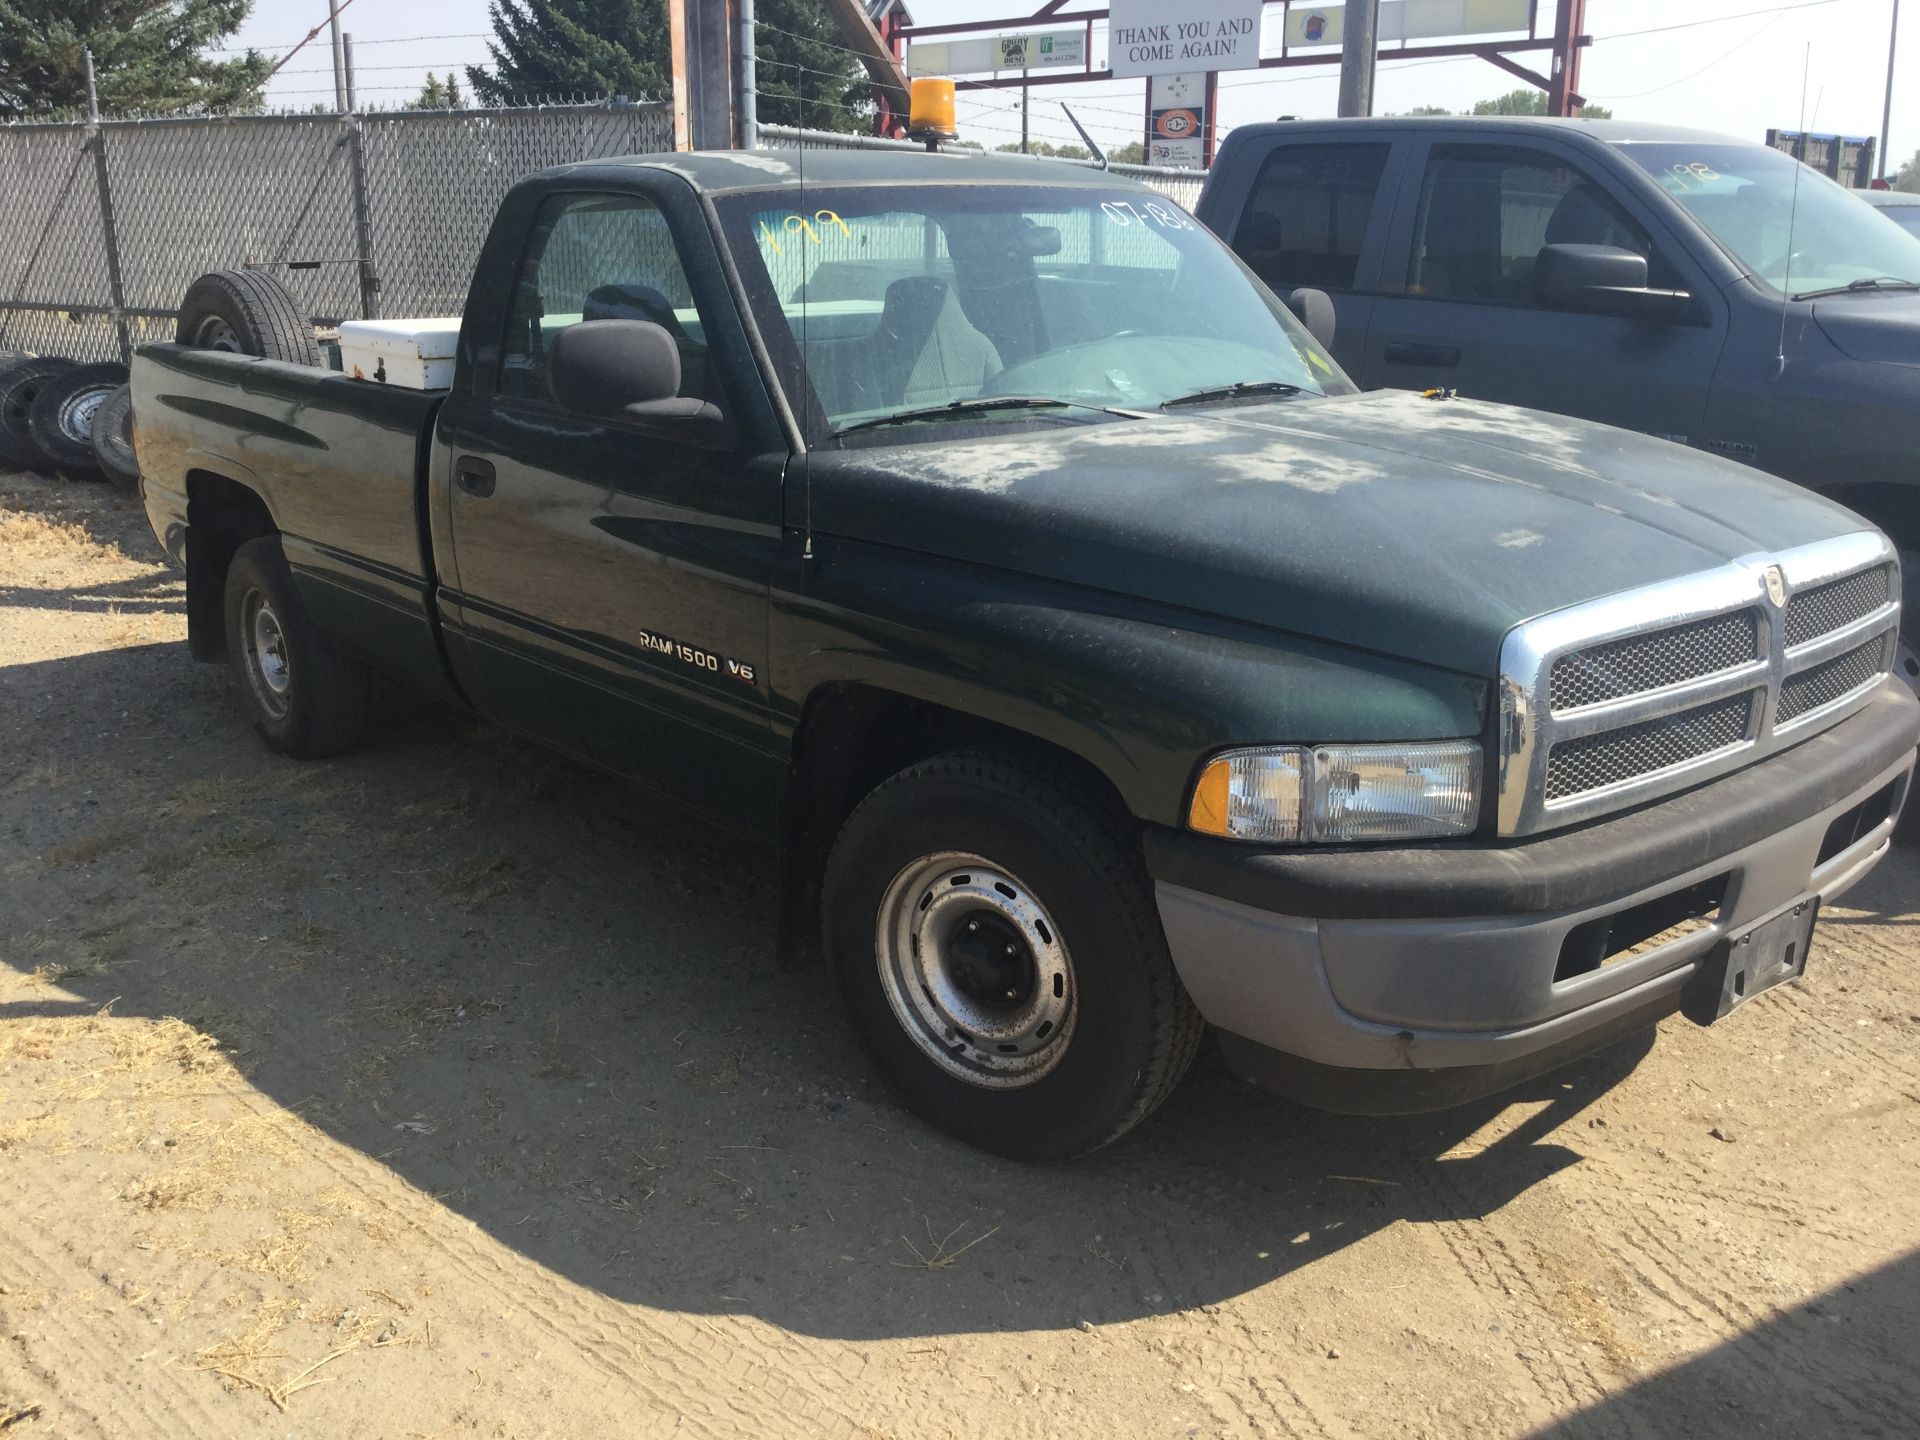 Year: 2000 Make: Dodge Model: 1/2T Type: Pickup Vin#: 561821 Mileage/Hours: 176001 3.9L, 2WD, RC, - Image 3 of 4